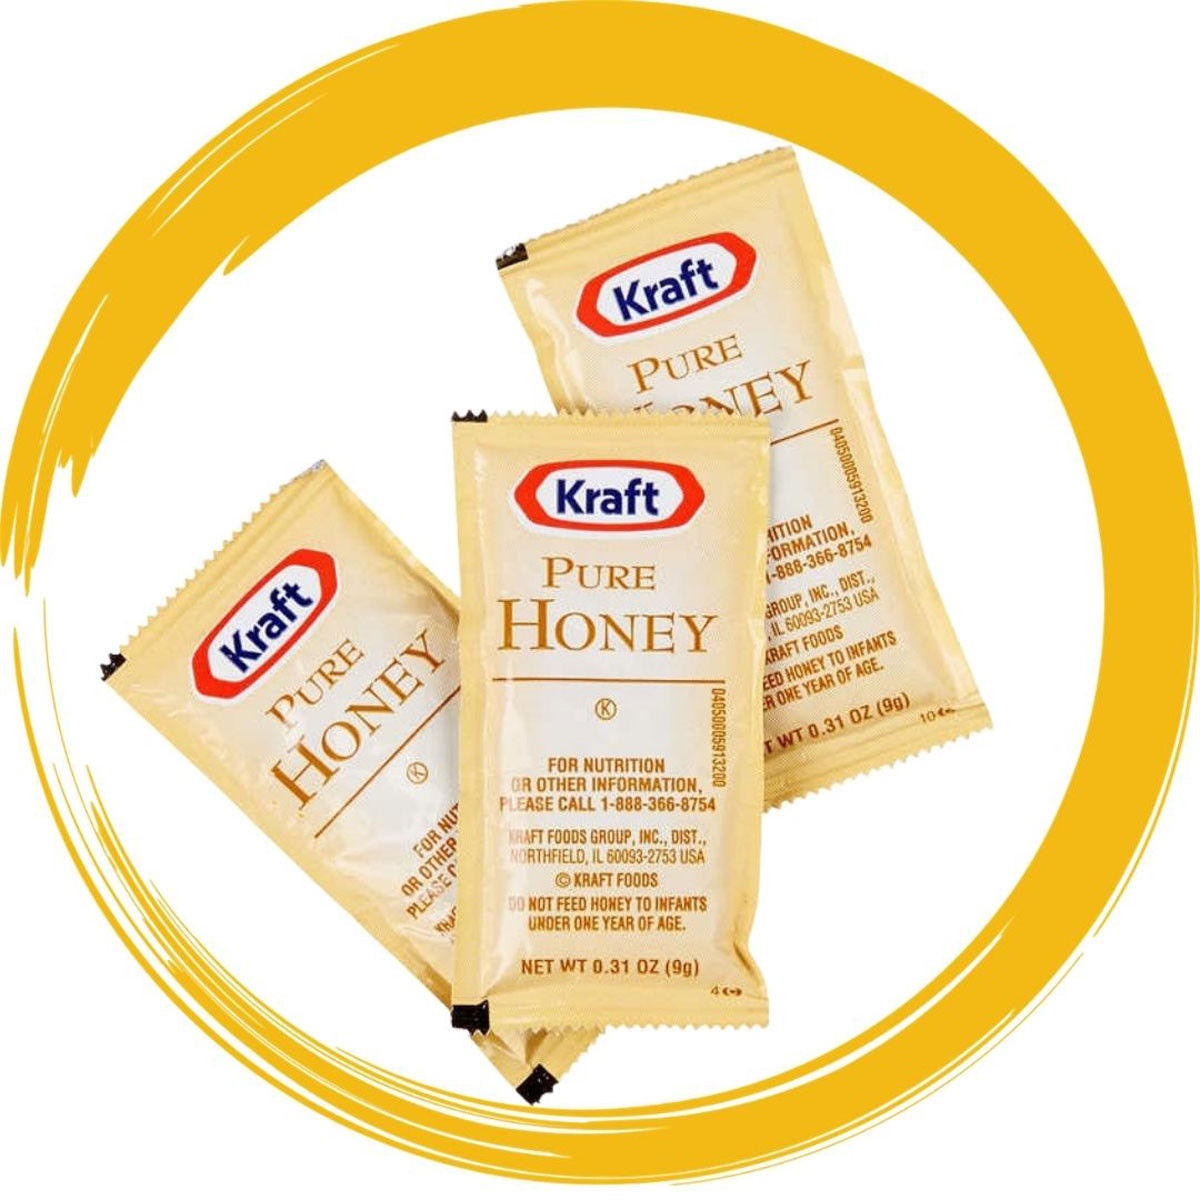 What are the ingredients in Kraft pure honey?